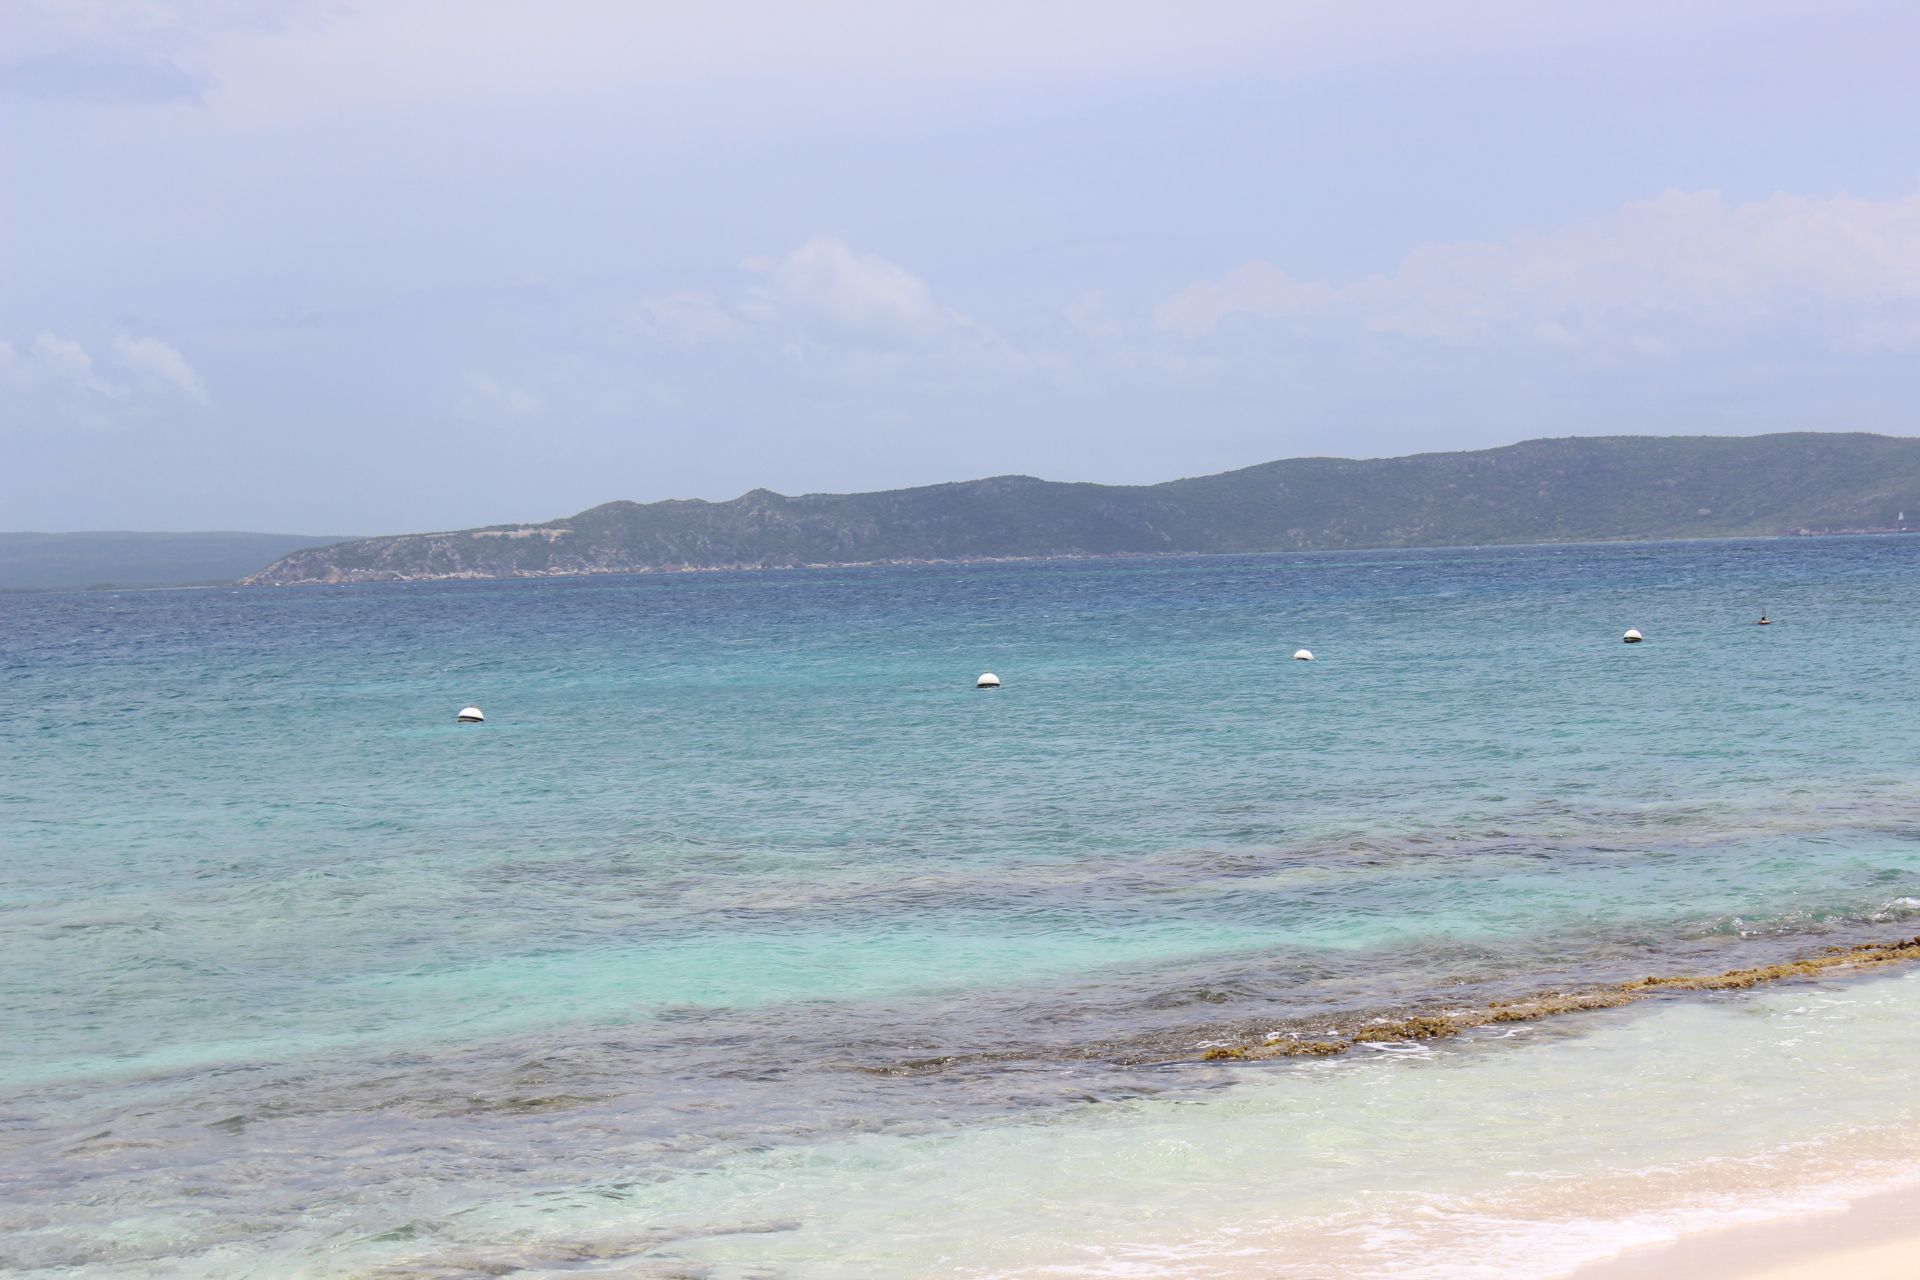 View of the Island of Kingston, Jamaica, from Lime Cay Beach, an islet in Jamaica. Image by Monica Long. Jamaica, 2018.